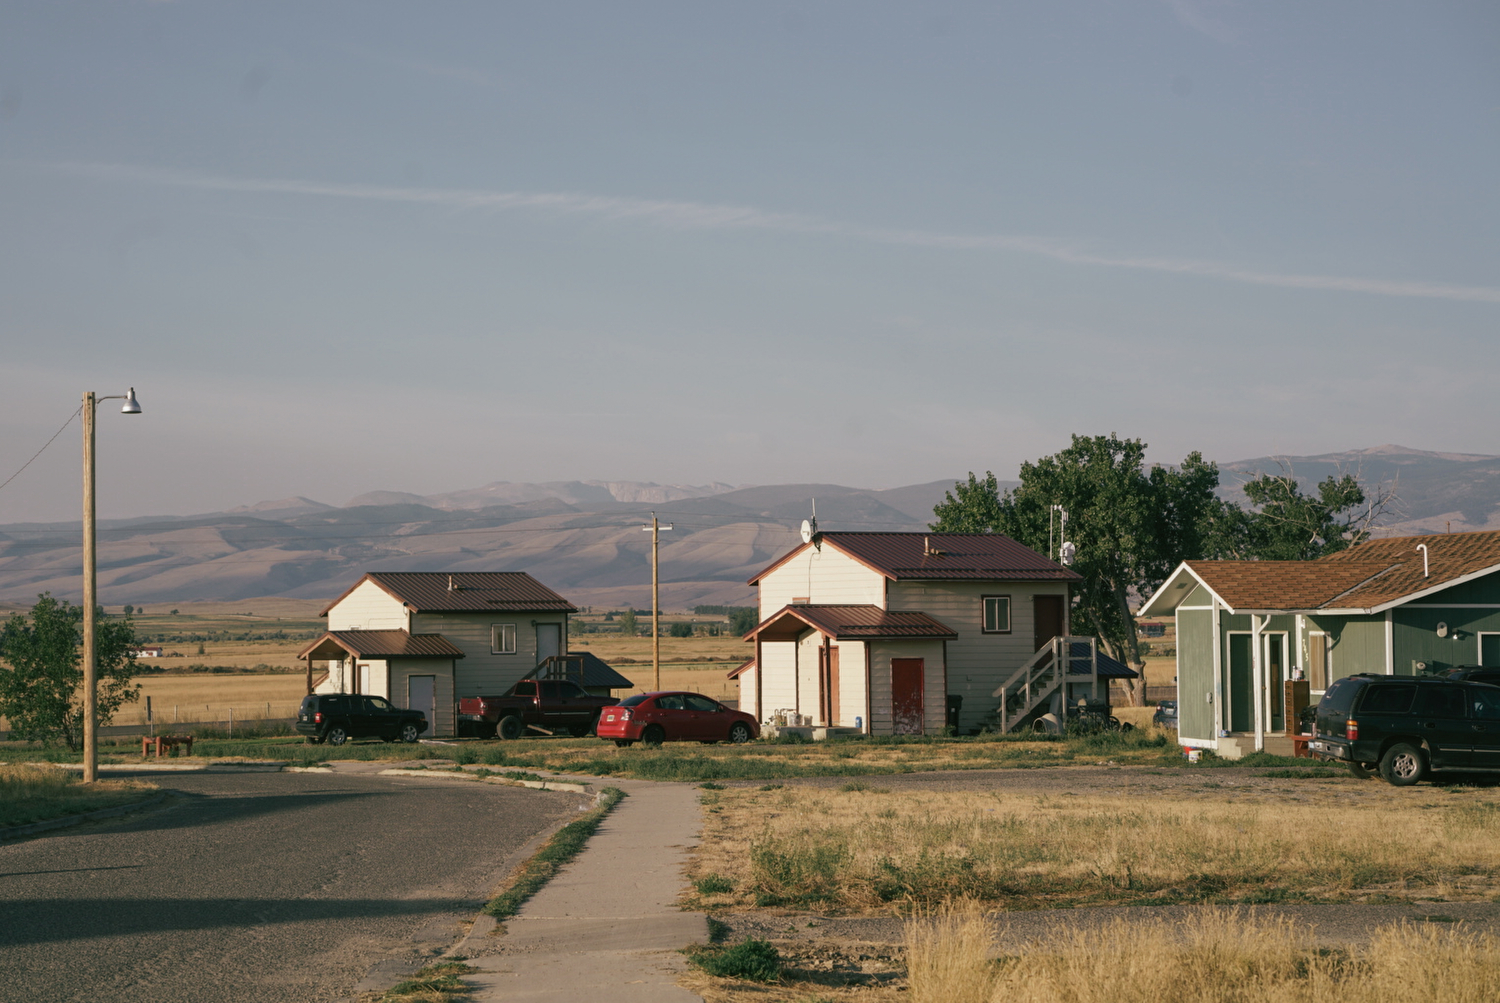 The sun rises over subsidized housing on the Wind River Indian Reservation.